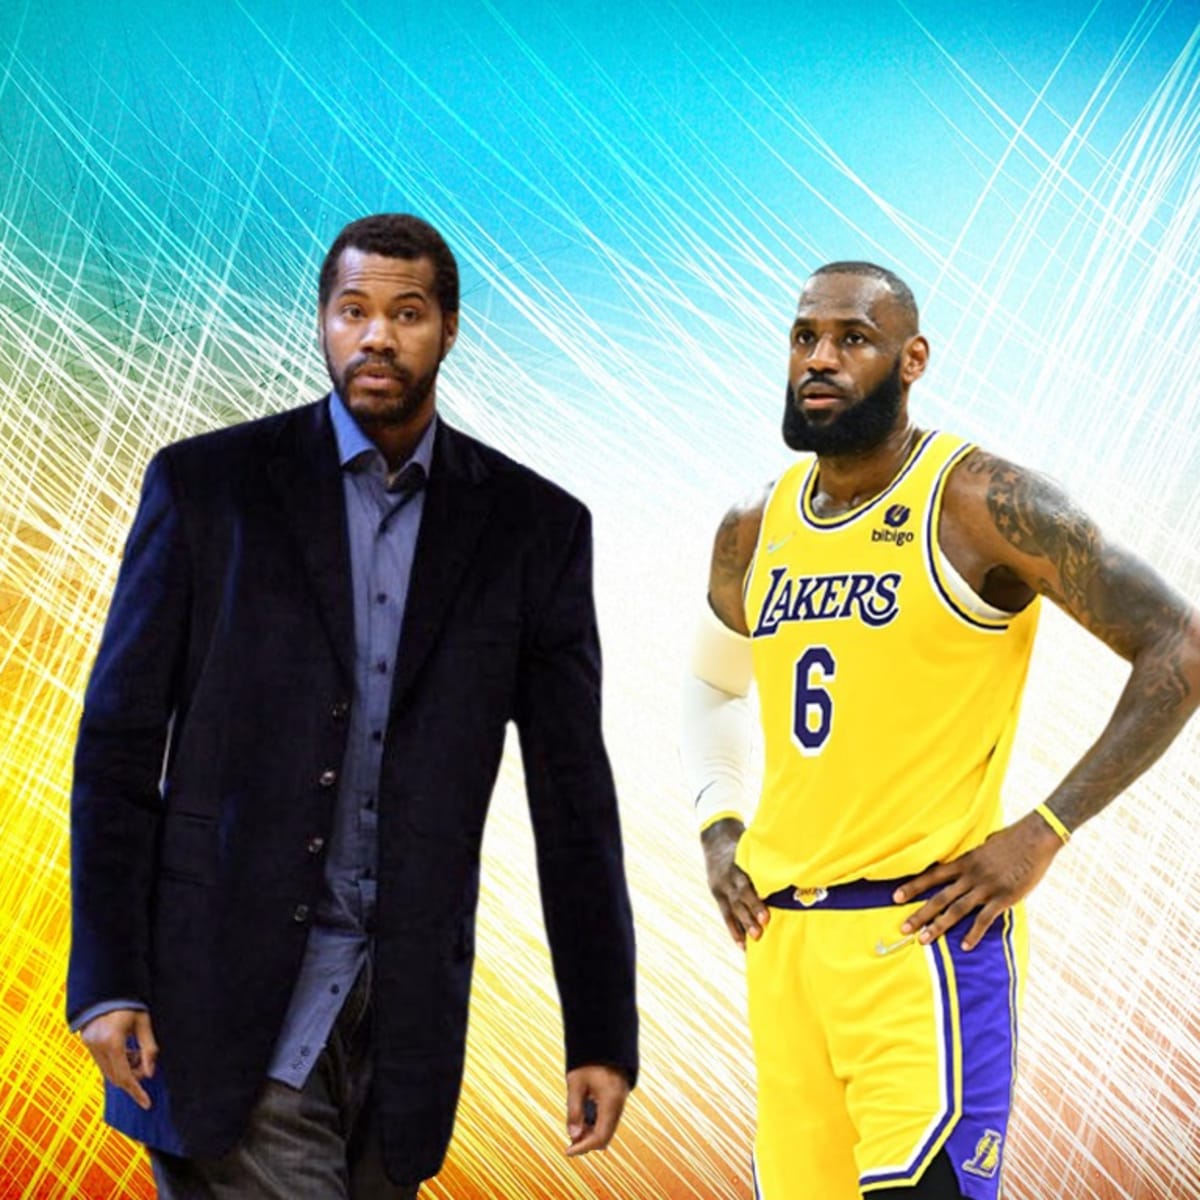 Rasheed Wallace net worth 2022: How much money did Wallace make in the NBA?